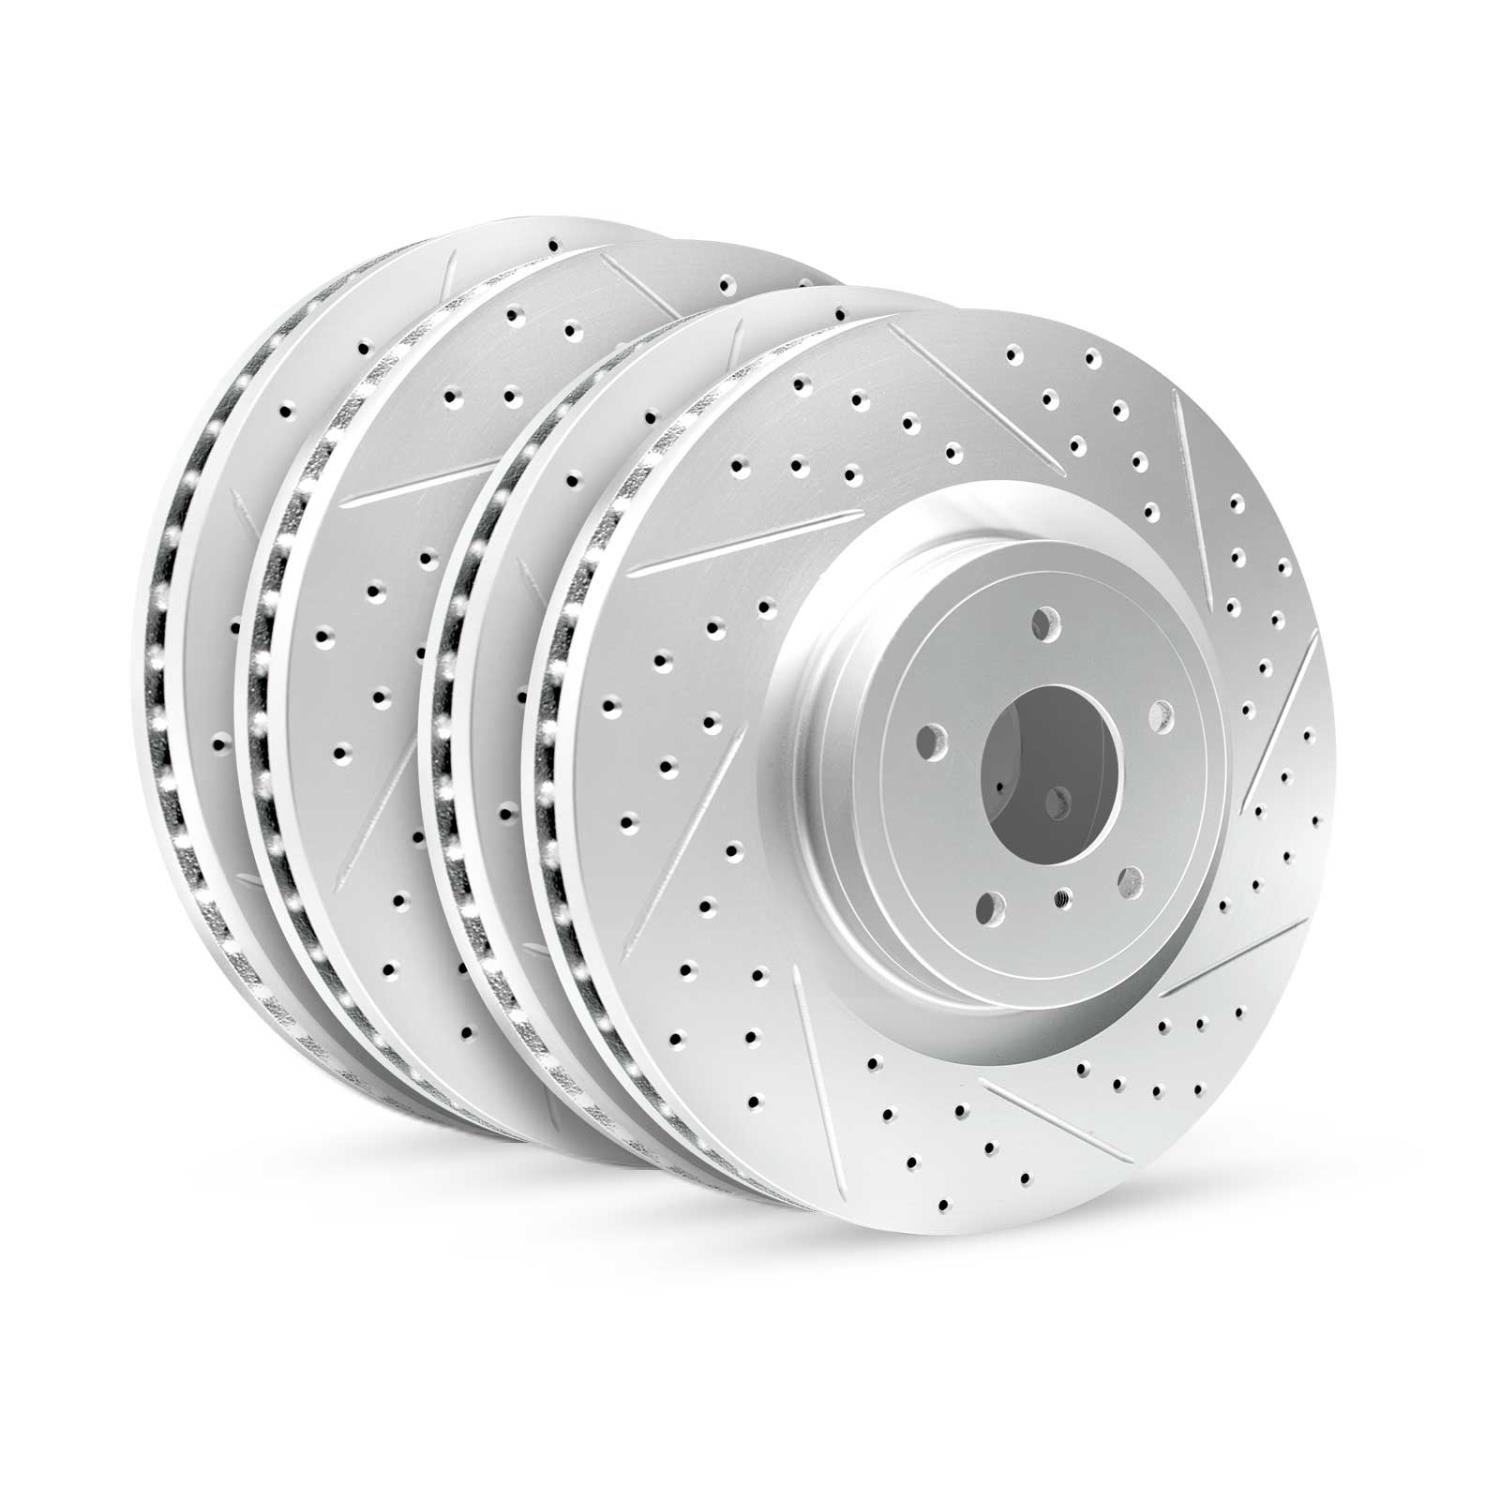 GEO-Carbon Drilled/Slotted Rotors, 2013-2020 Ford/Mazda,